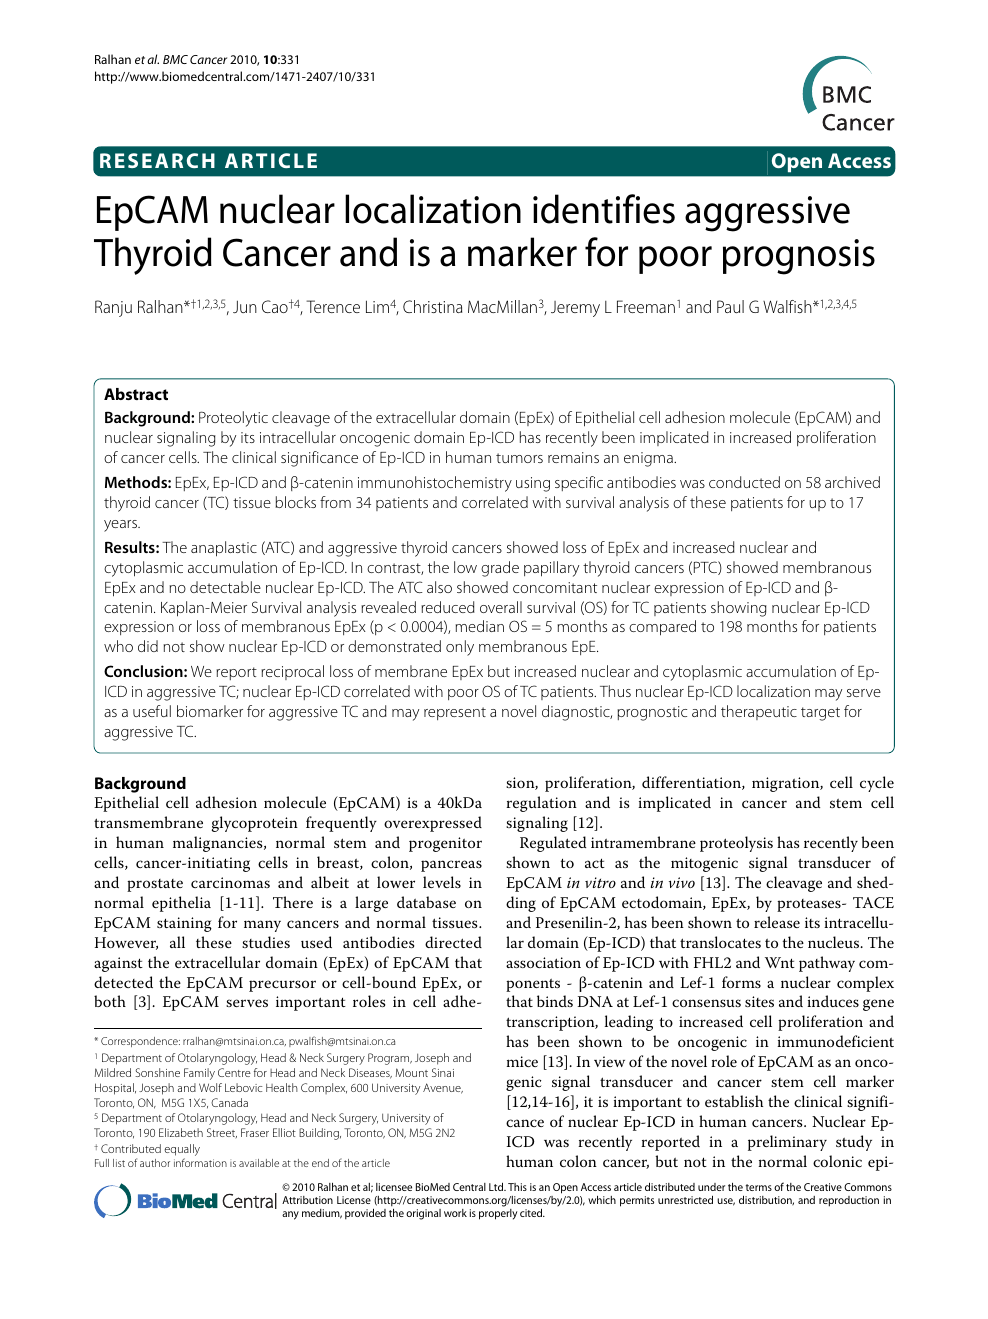 Epcam Nuclear Localization Identifies Aggressive Thyroid Cancer And Is A Marker For Poor Prognosis Topic Of Research Paper In Clinical Medicine Download Scholarly Article Pdf And Read For Free On Cyberleninka